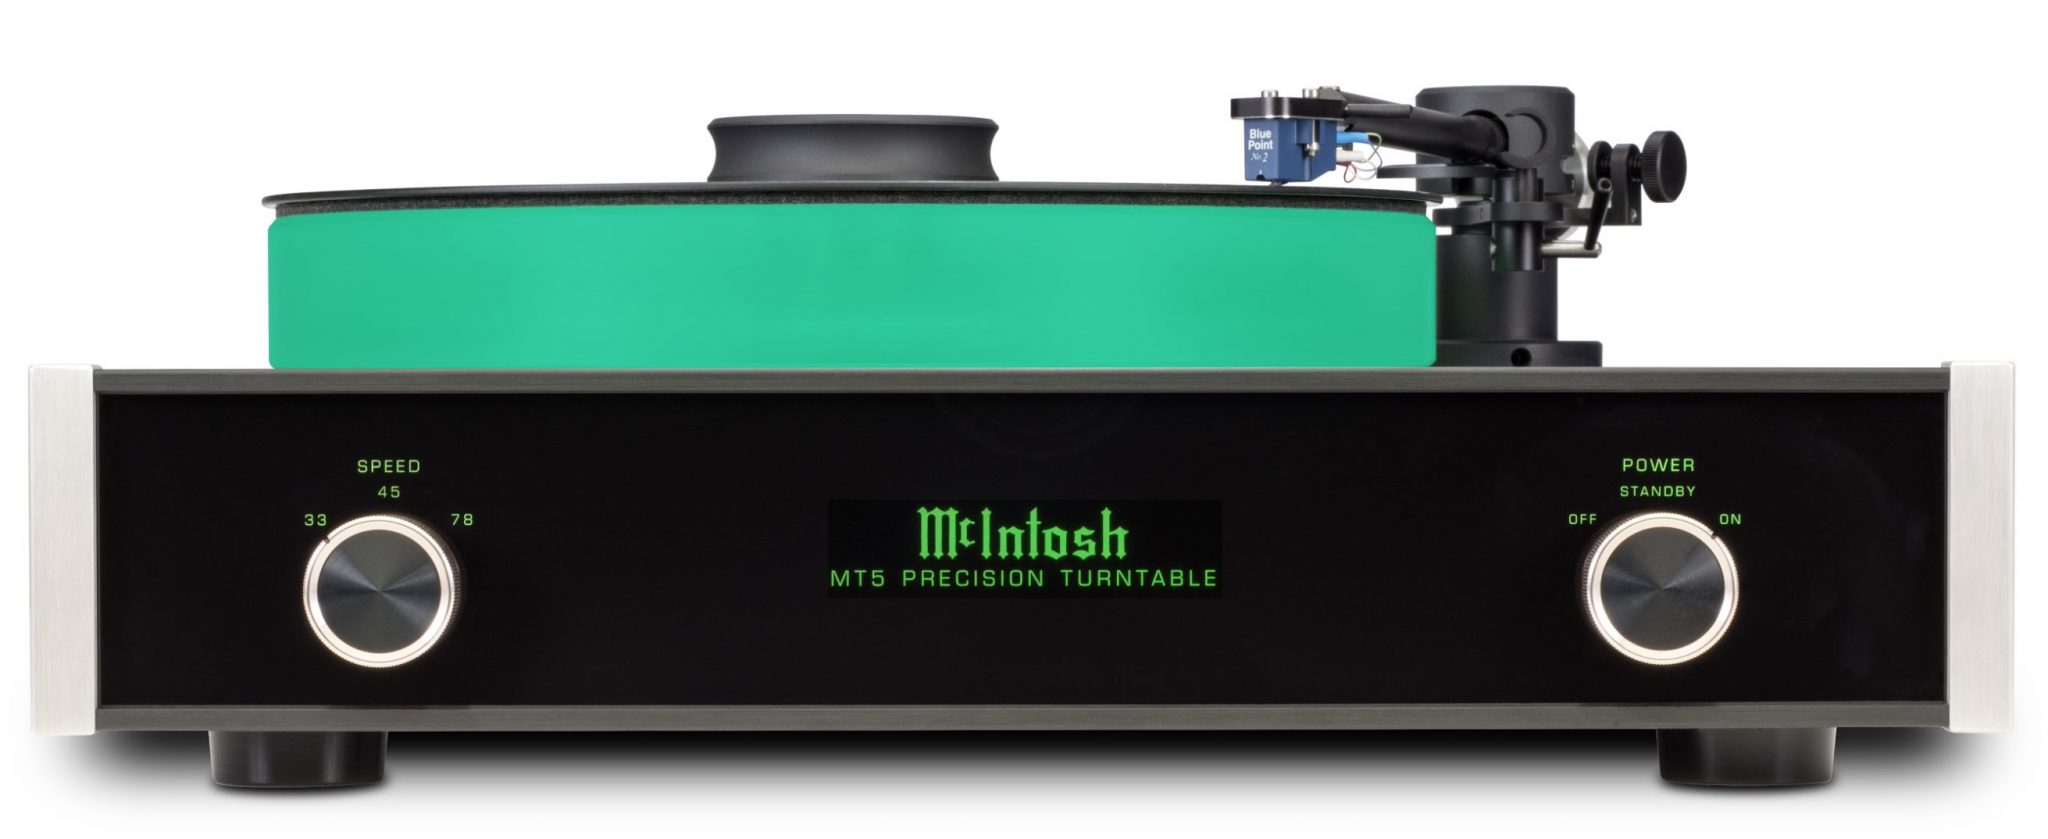 McIntosh MT5 Turntable: Turning Grooves Green